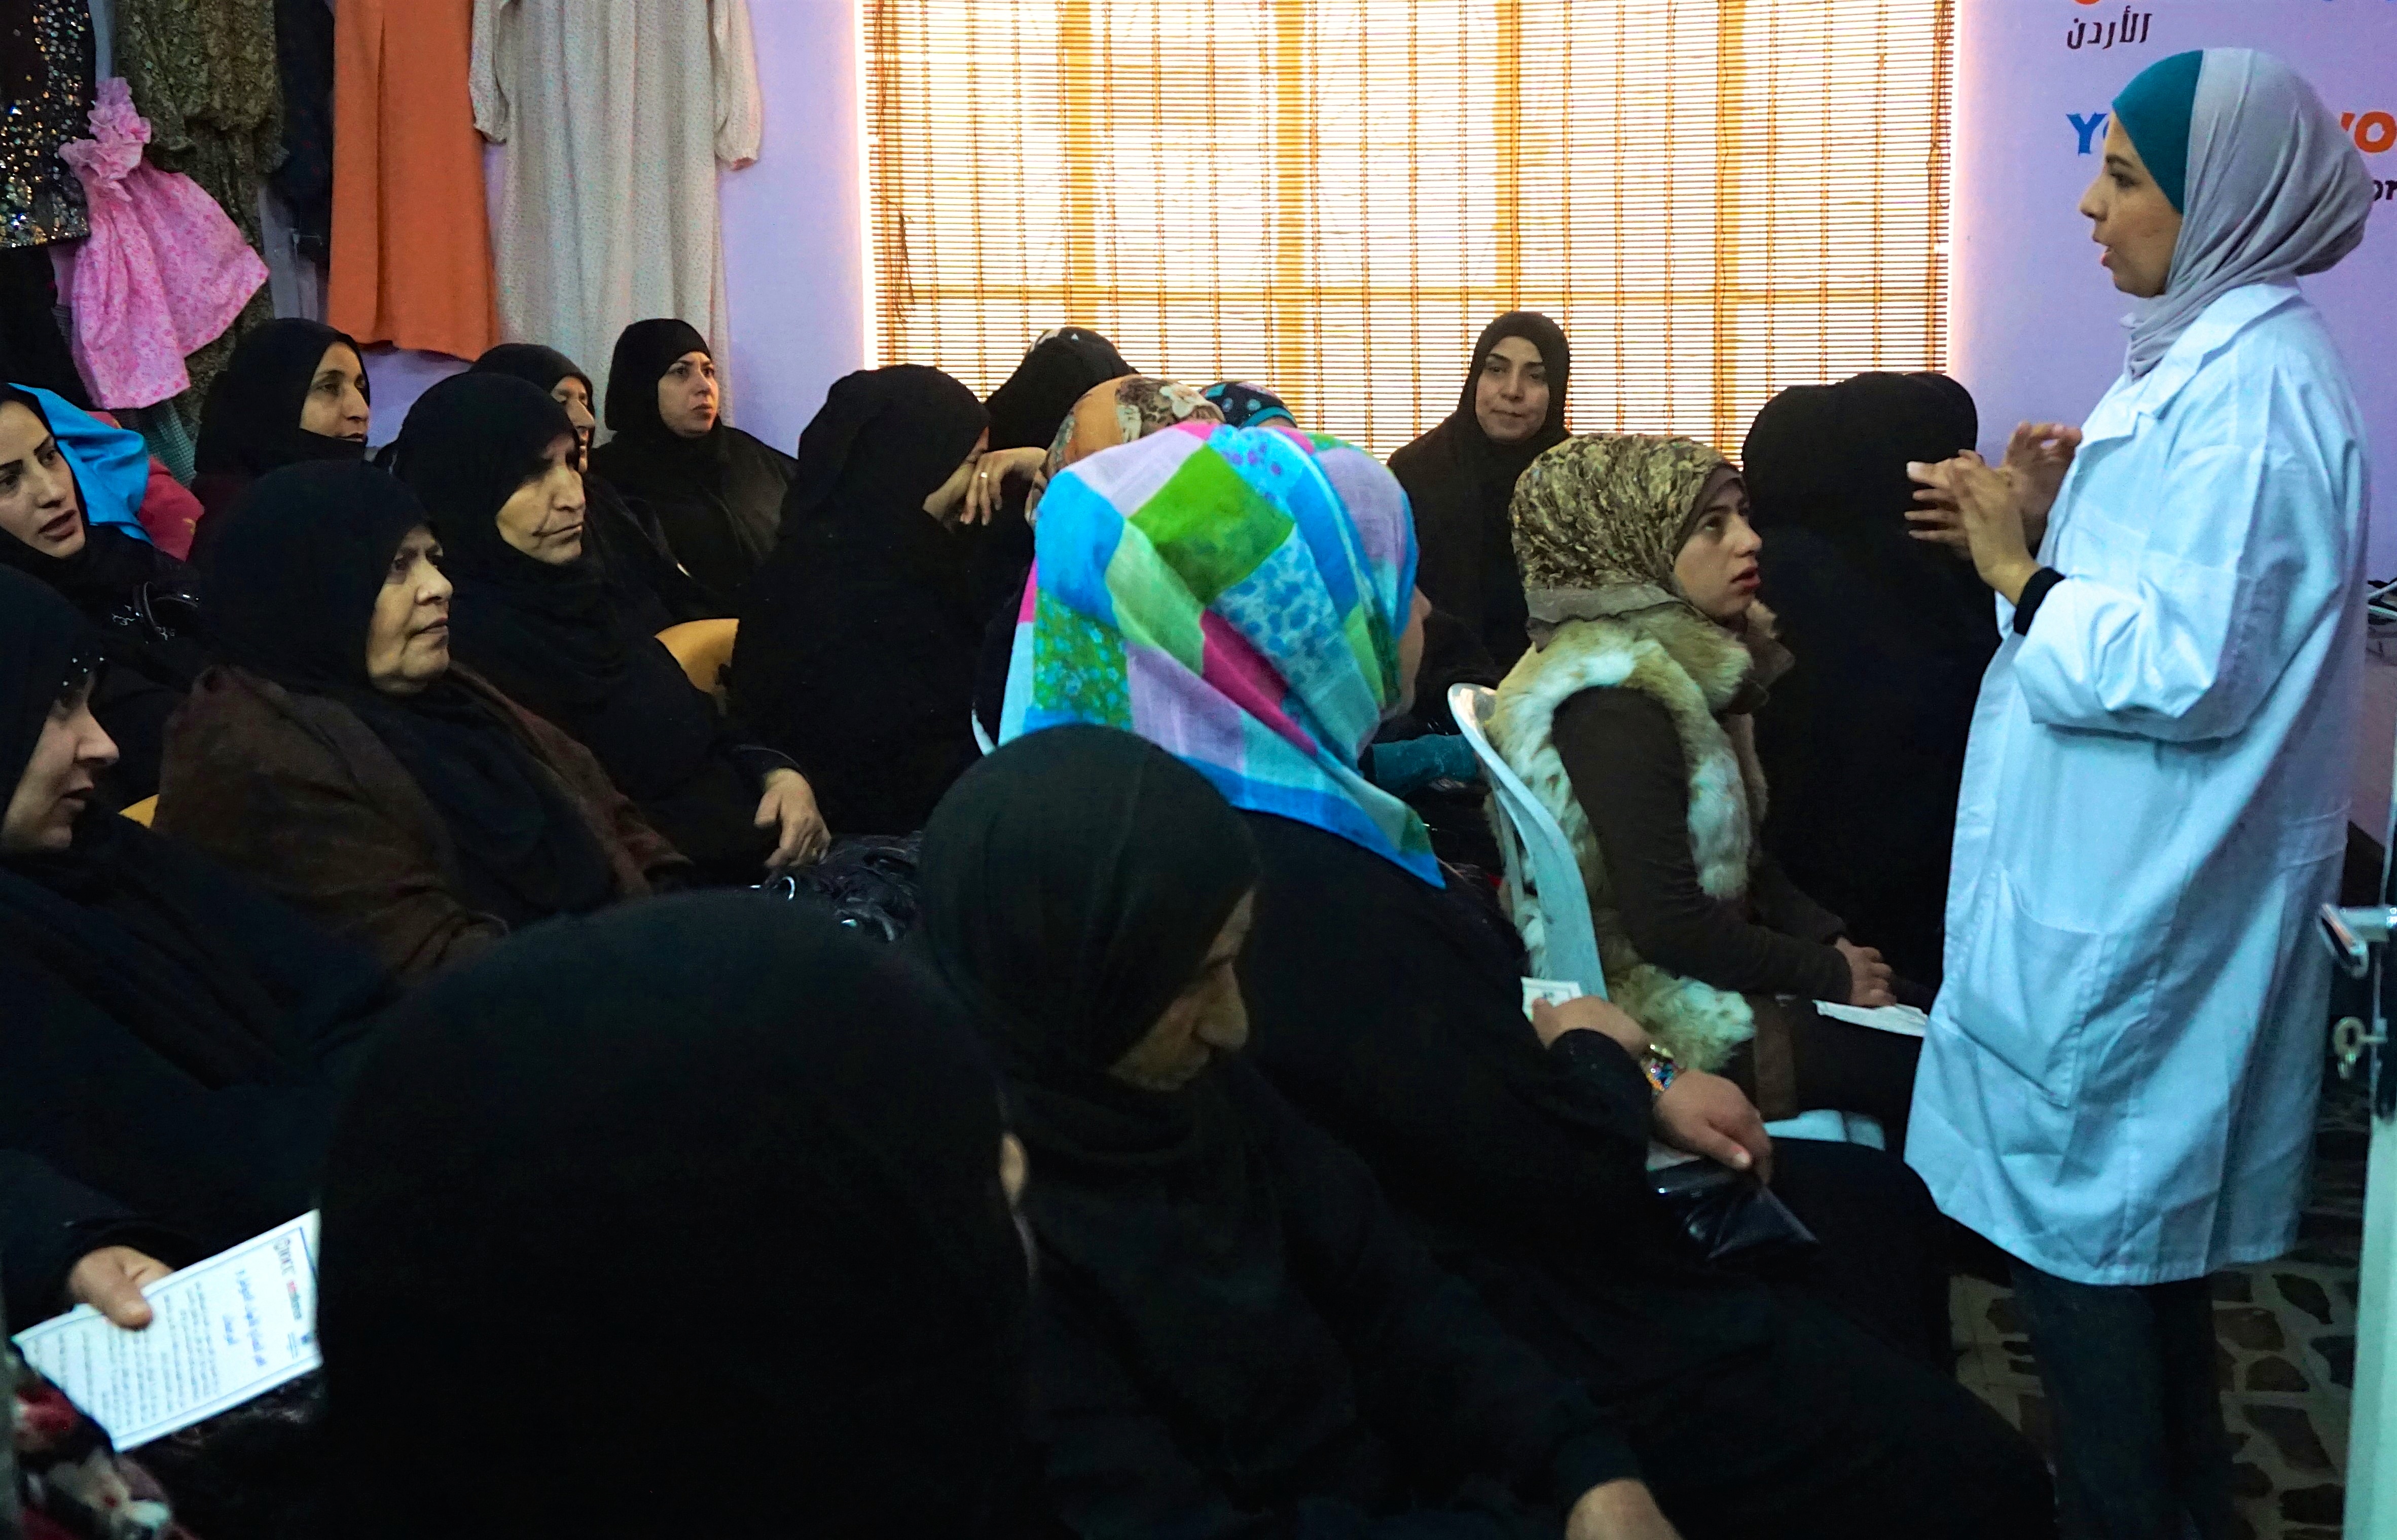 A health educator leads an awareness session for women